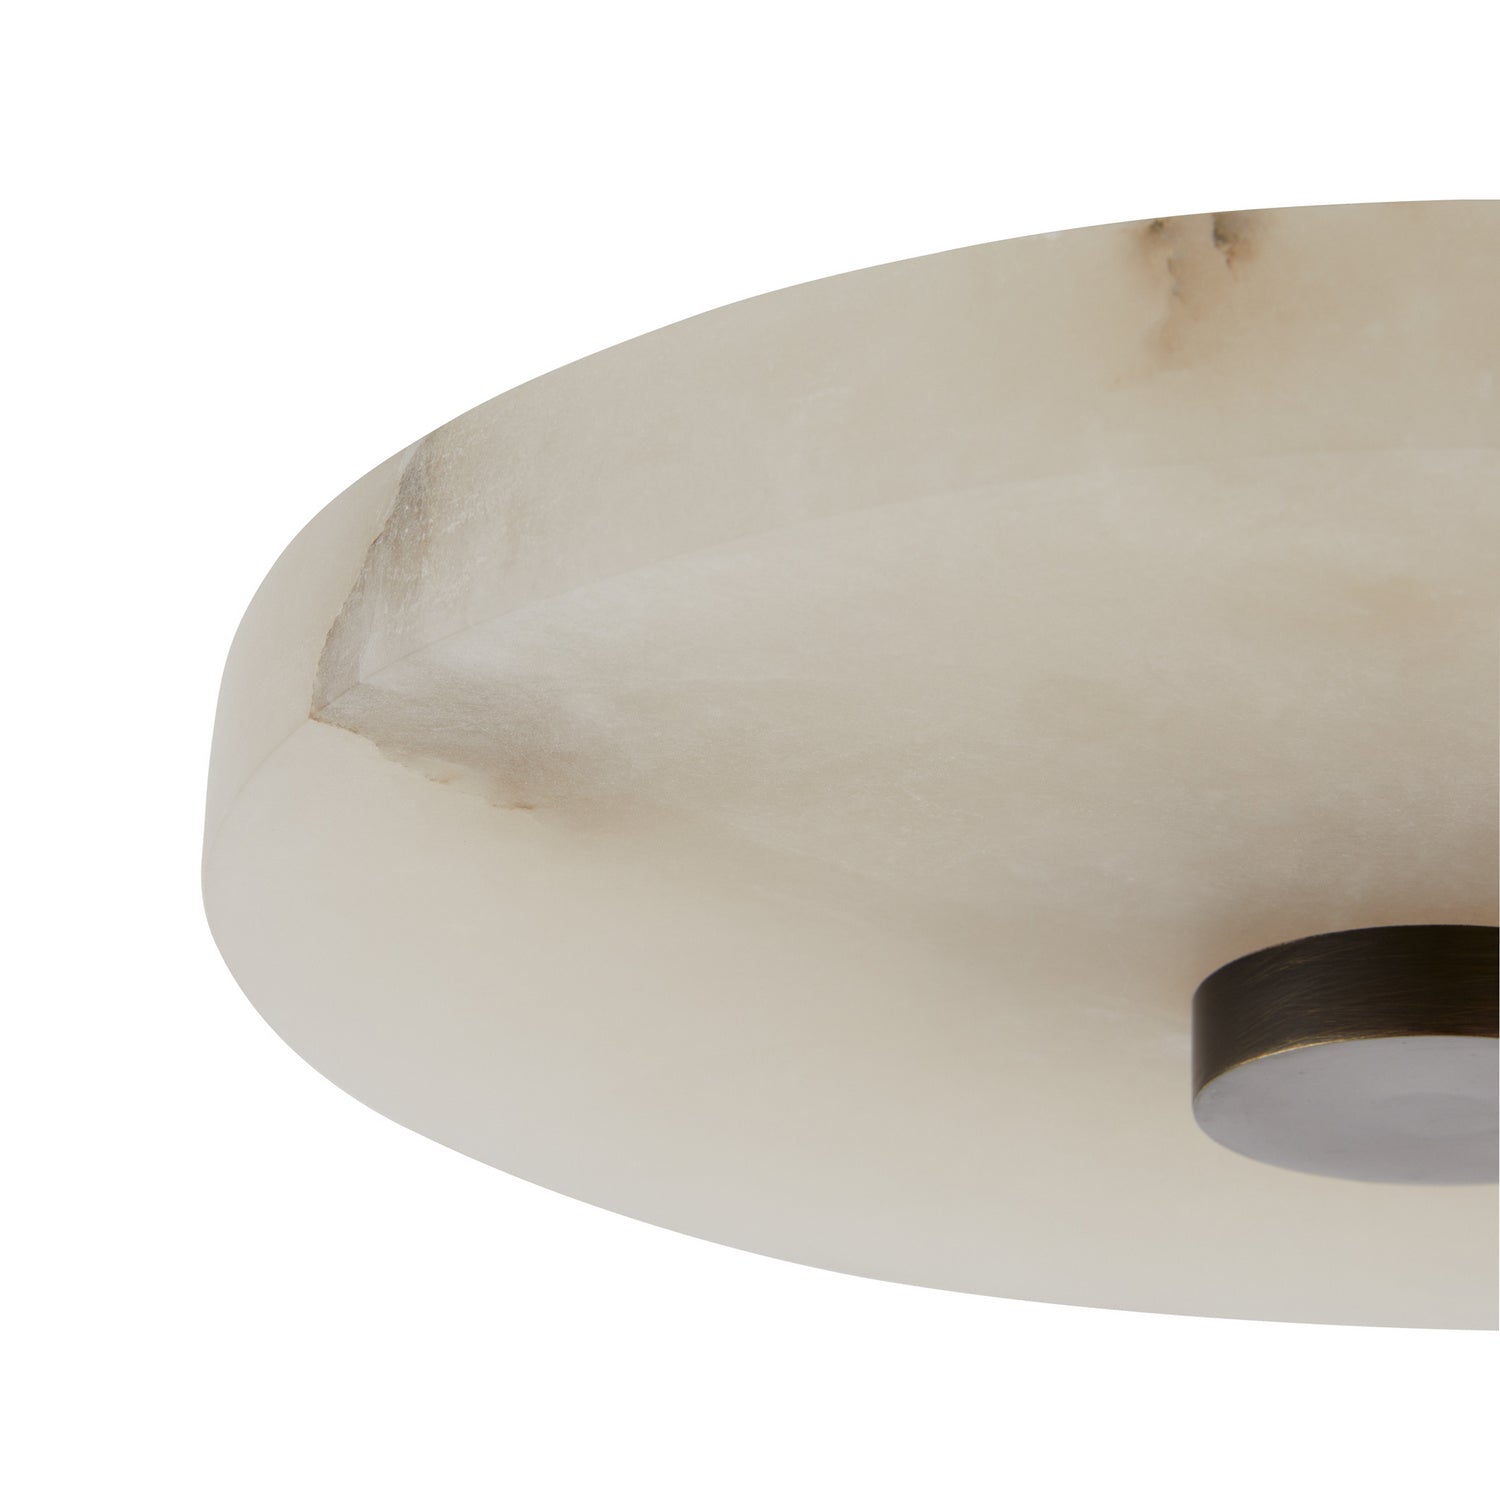 LED Flush Mount from the Moers collection in White finish